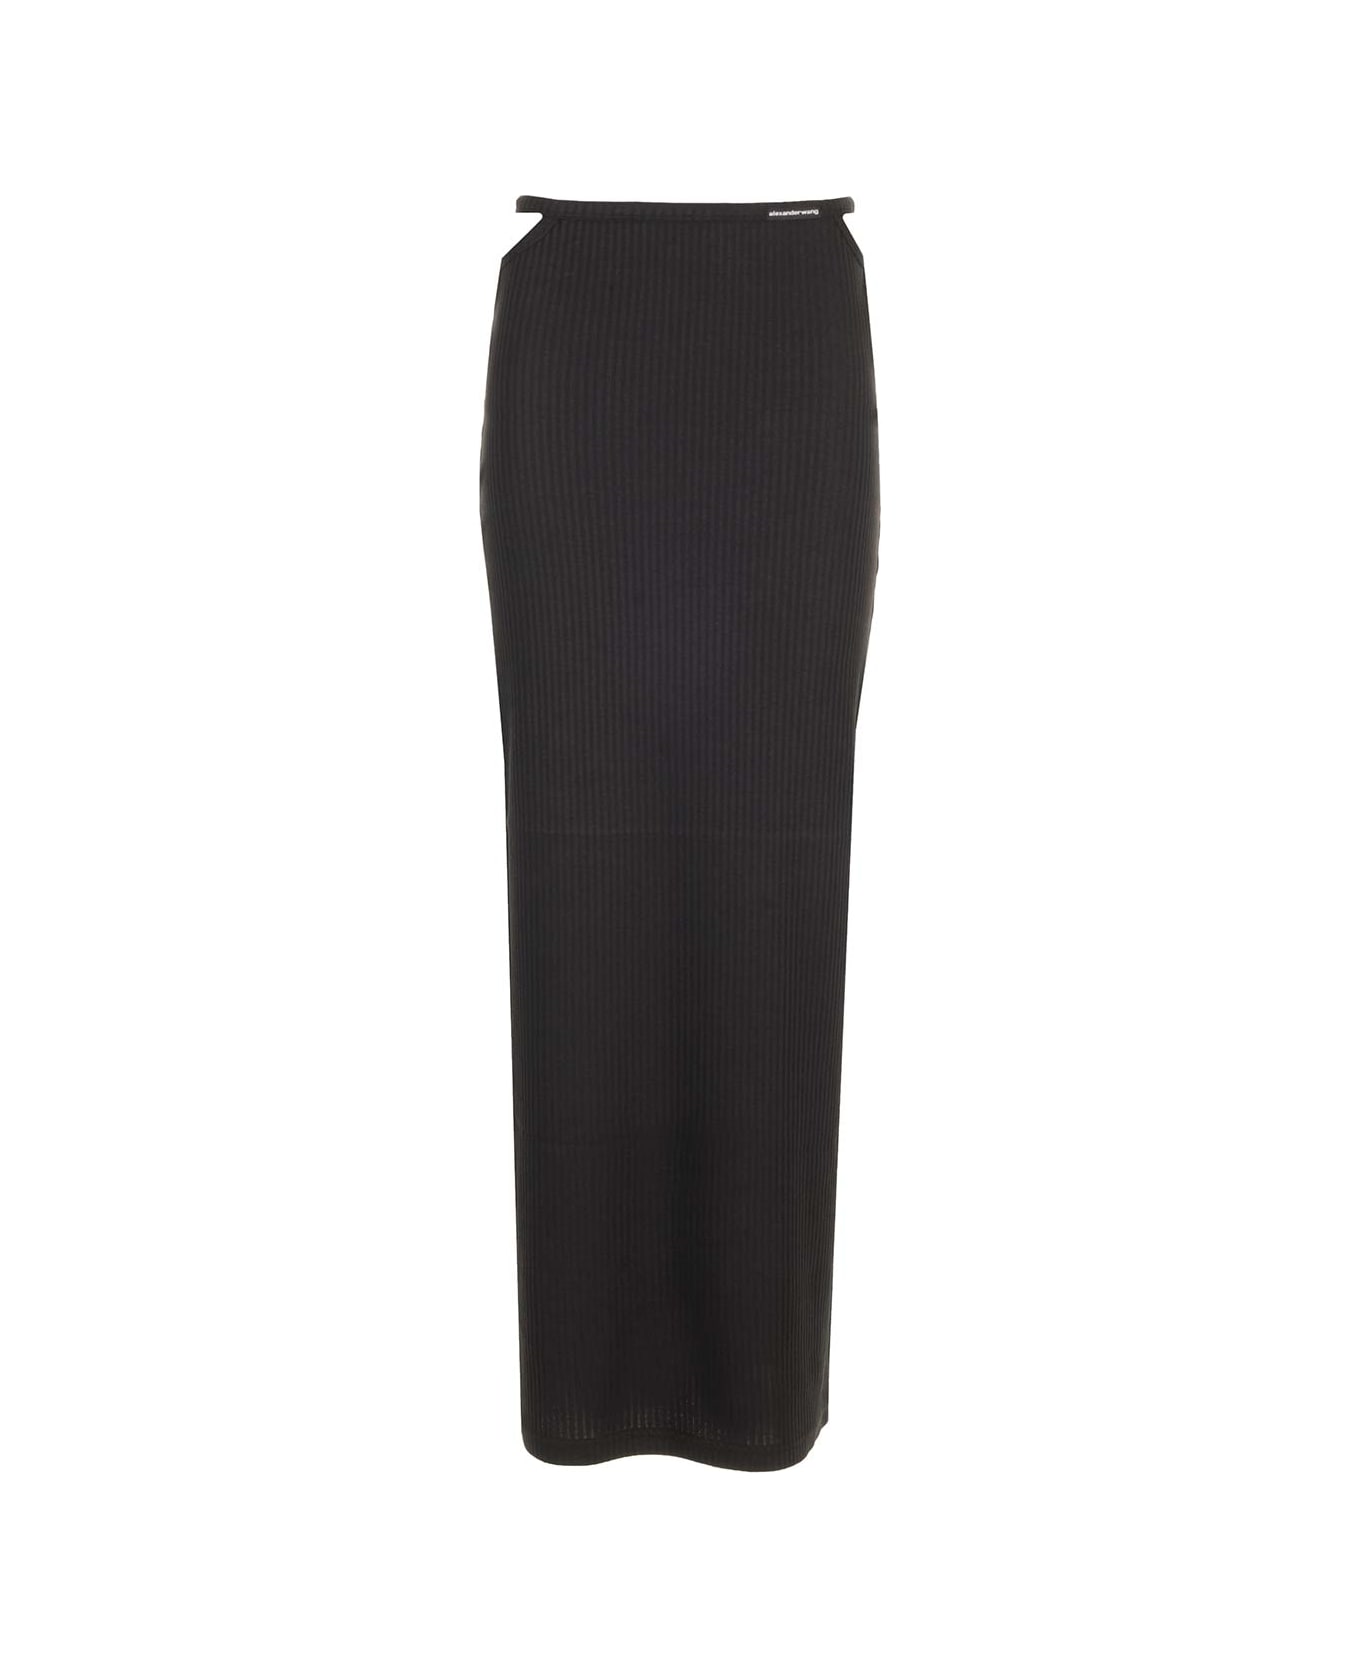 Alexander Wang Long Skirt In Ribbed Stretch Cotton - Black